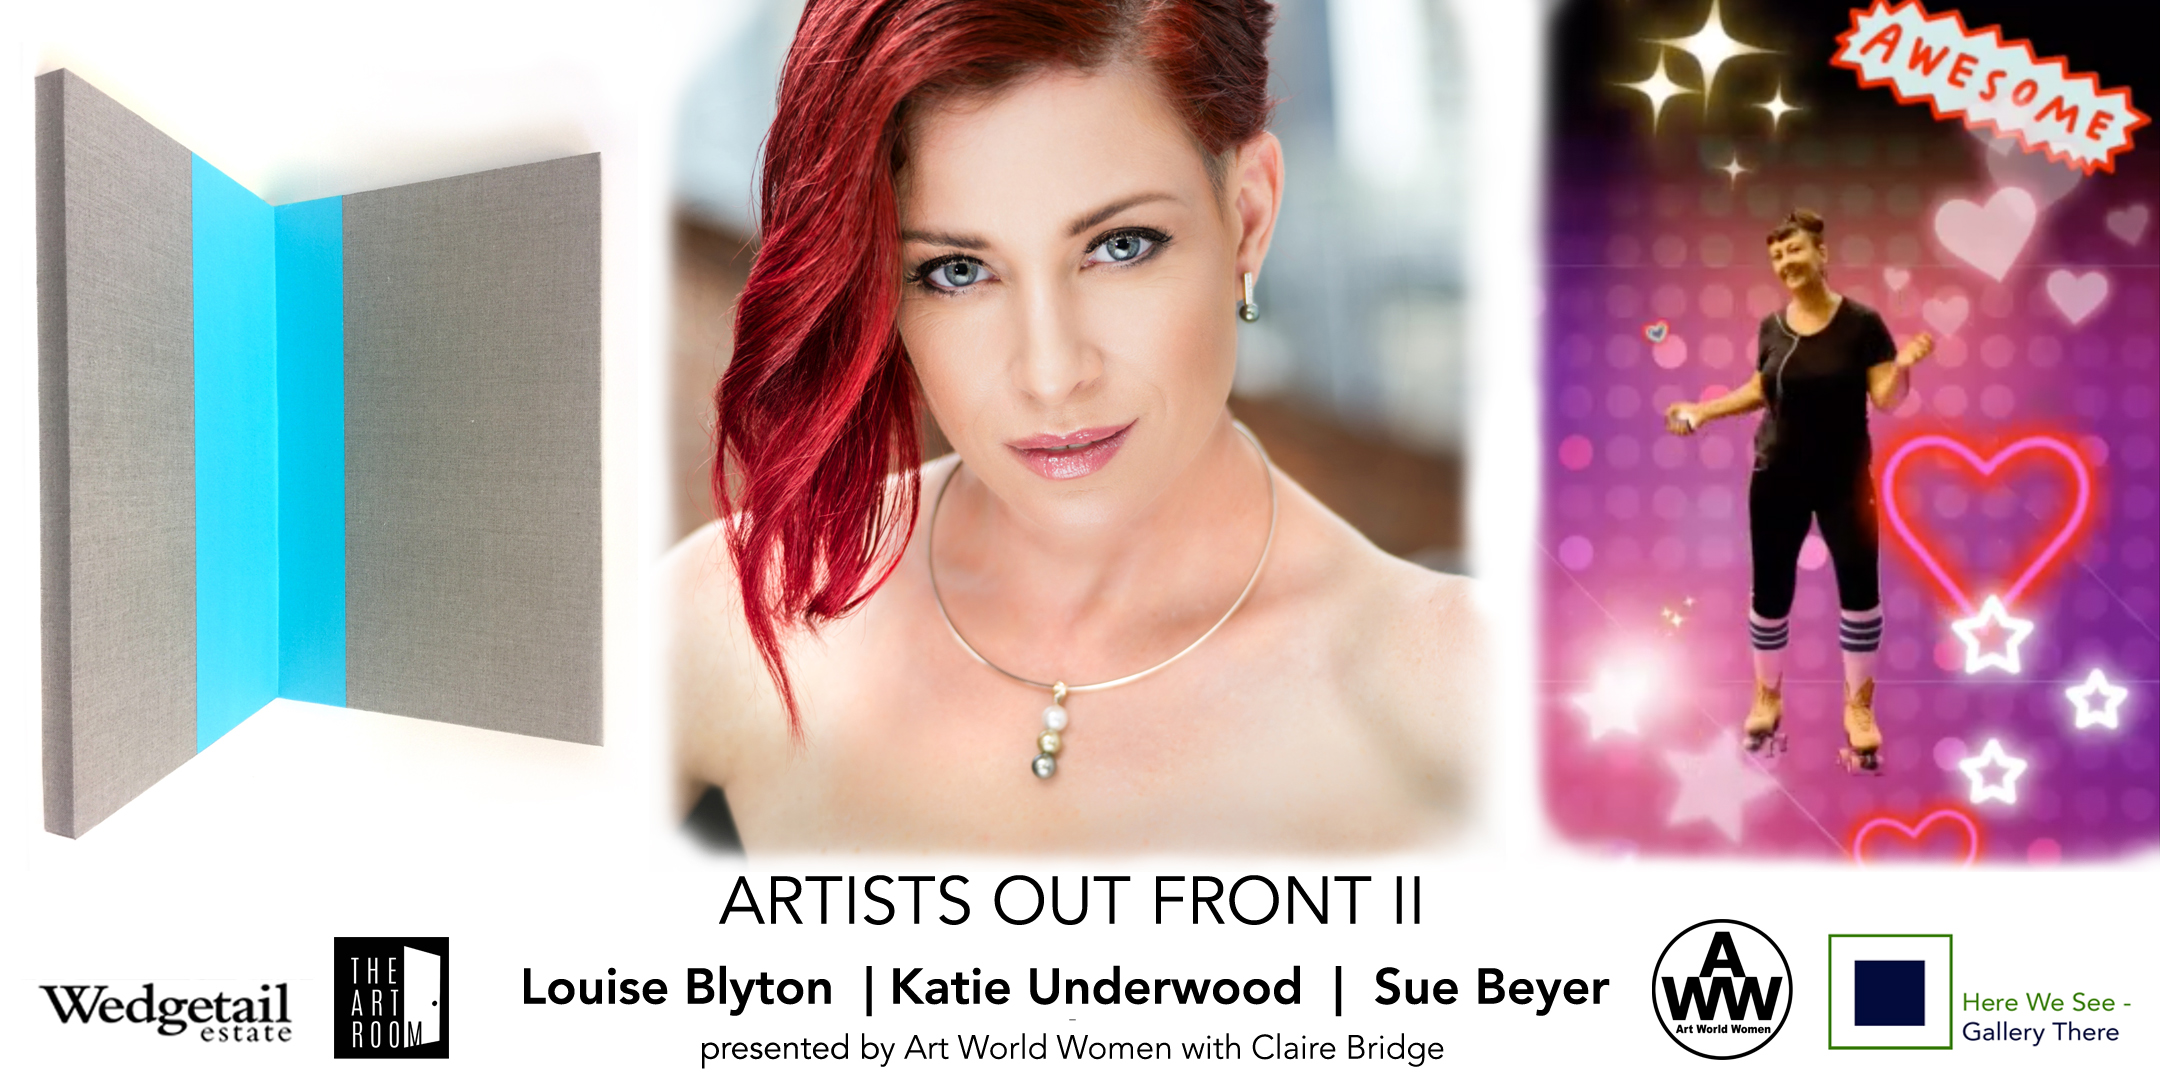 ARTISTS OUT FRONT II : Katie Underwood, Louise Blyton and Sue Beyer